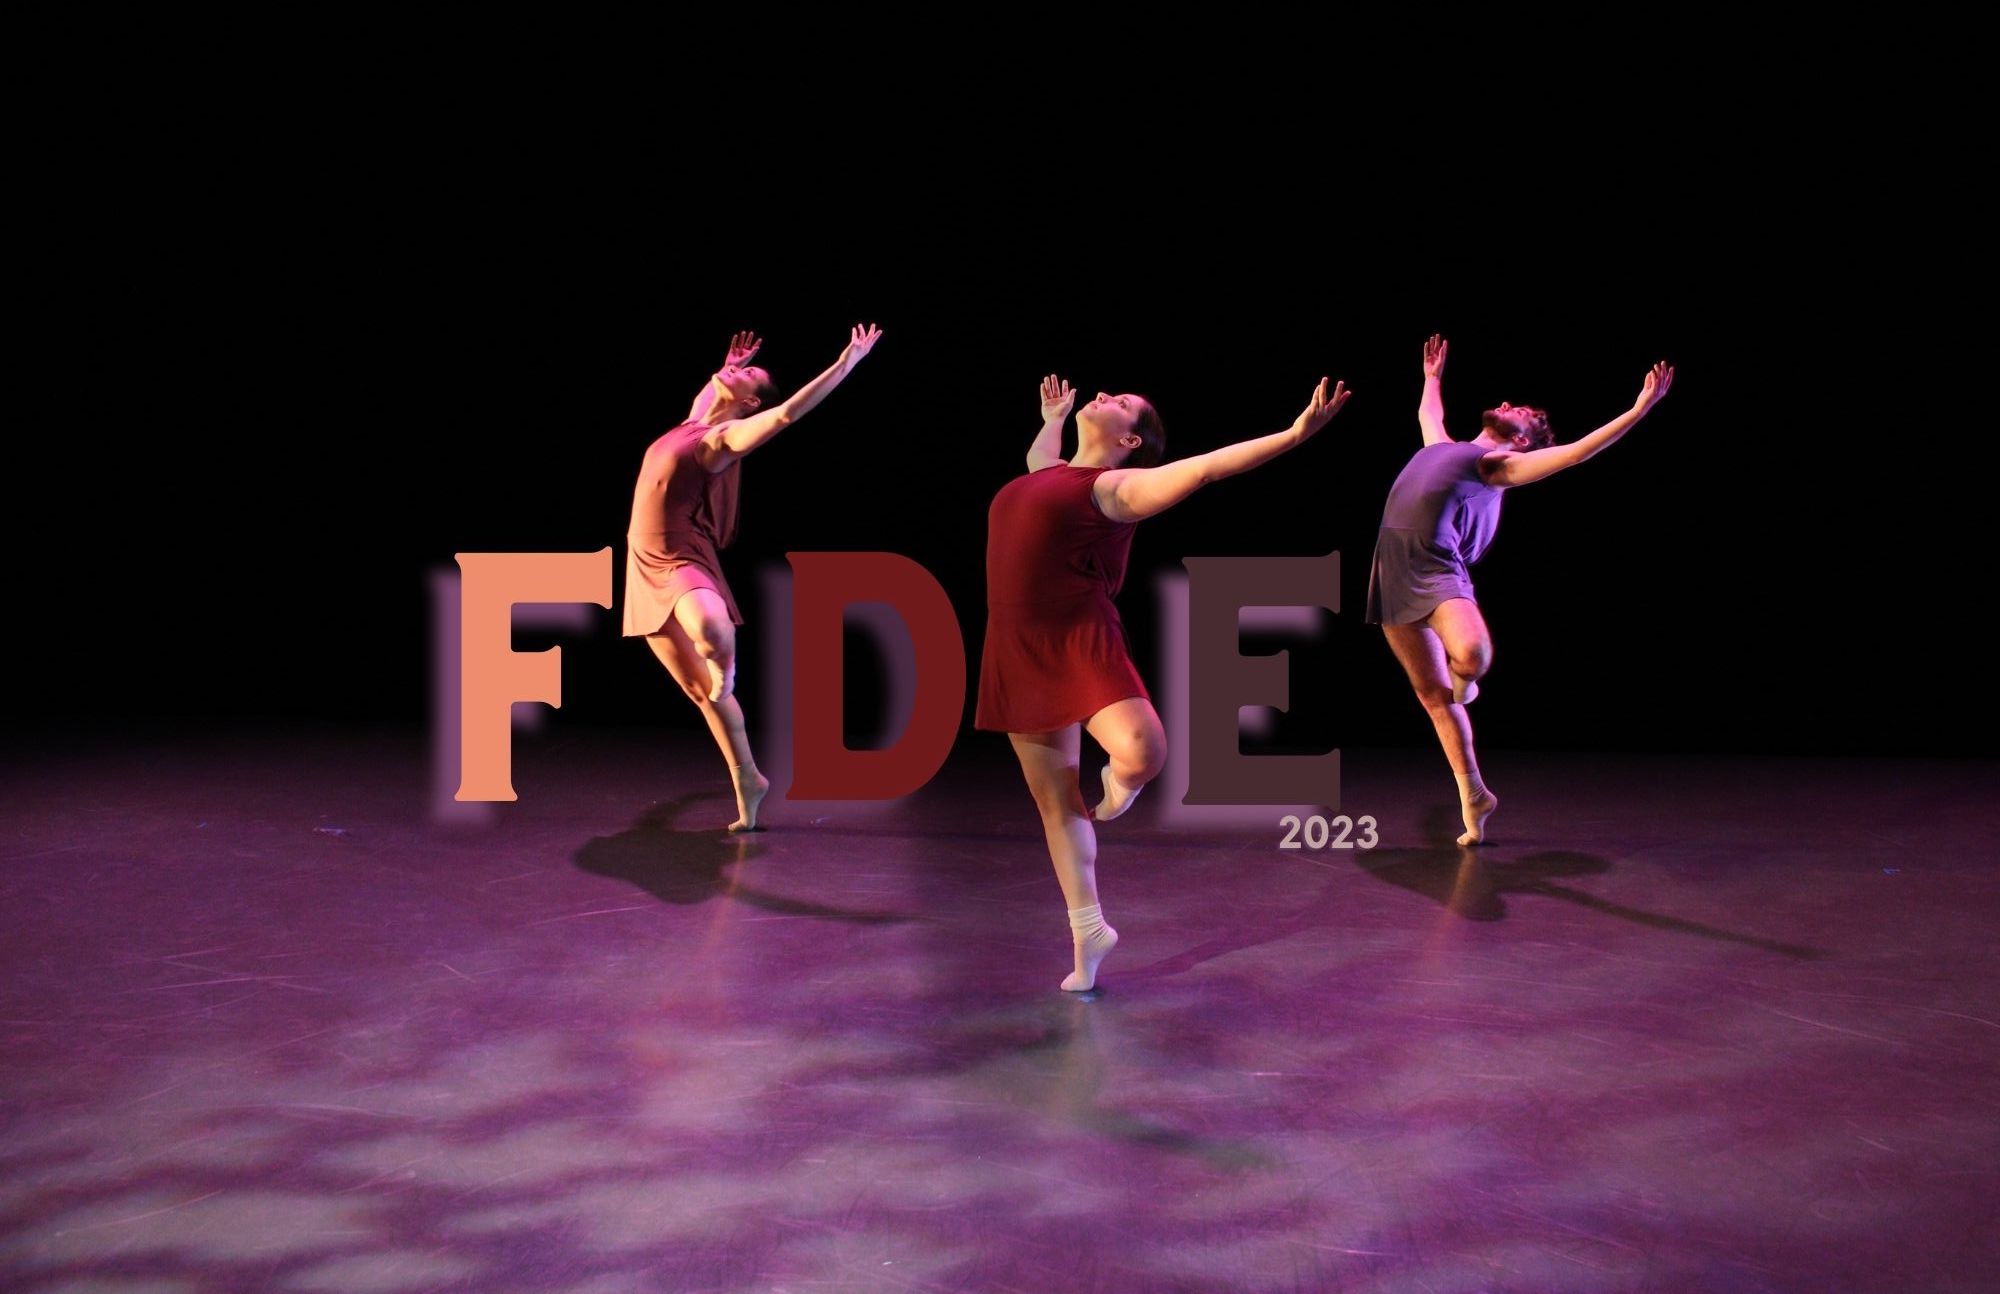 Fredonia Dance Ensemble performers on stage